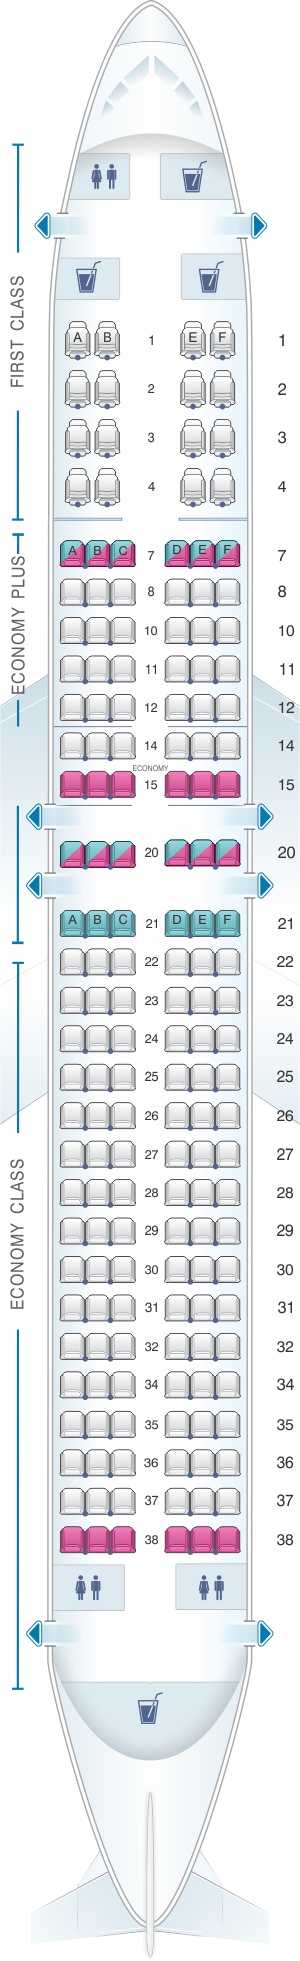 Boeing 737 800 United Airlines Seat Map Tutor Suhu